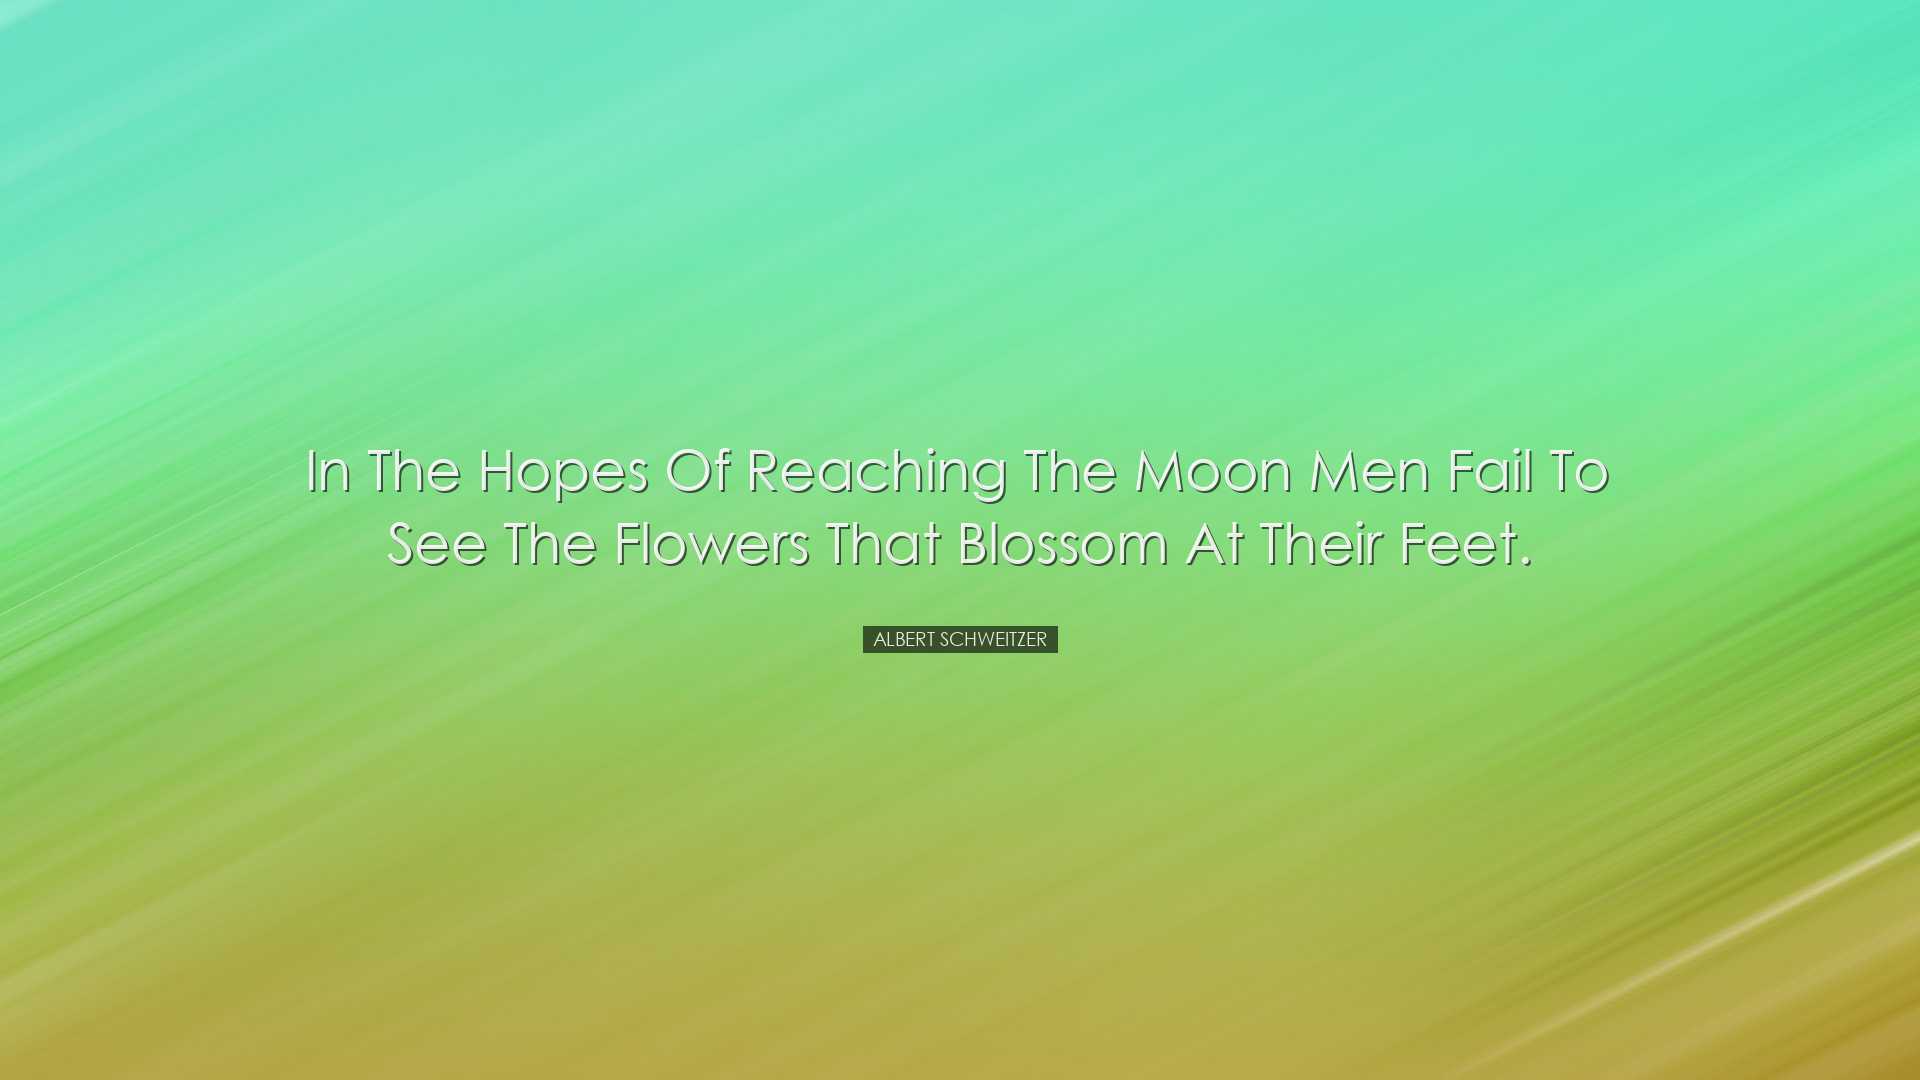 In the hopes of reaching the moon men fail to see the flowers that